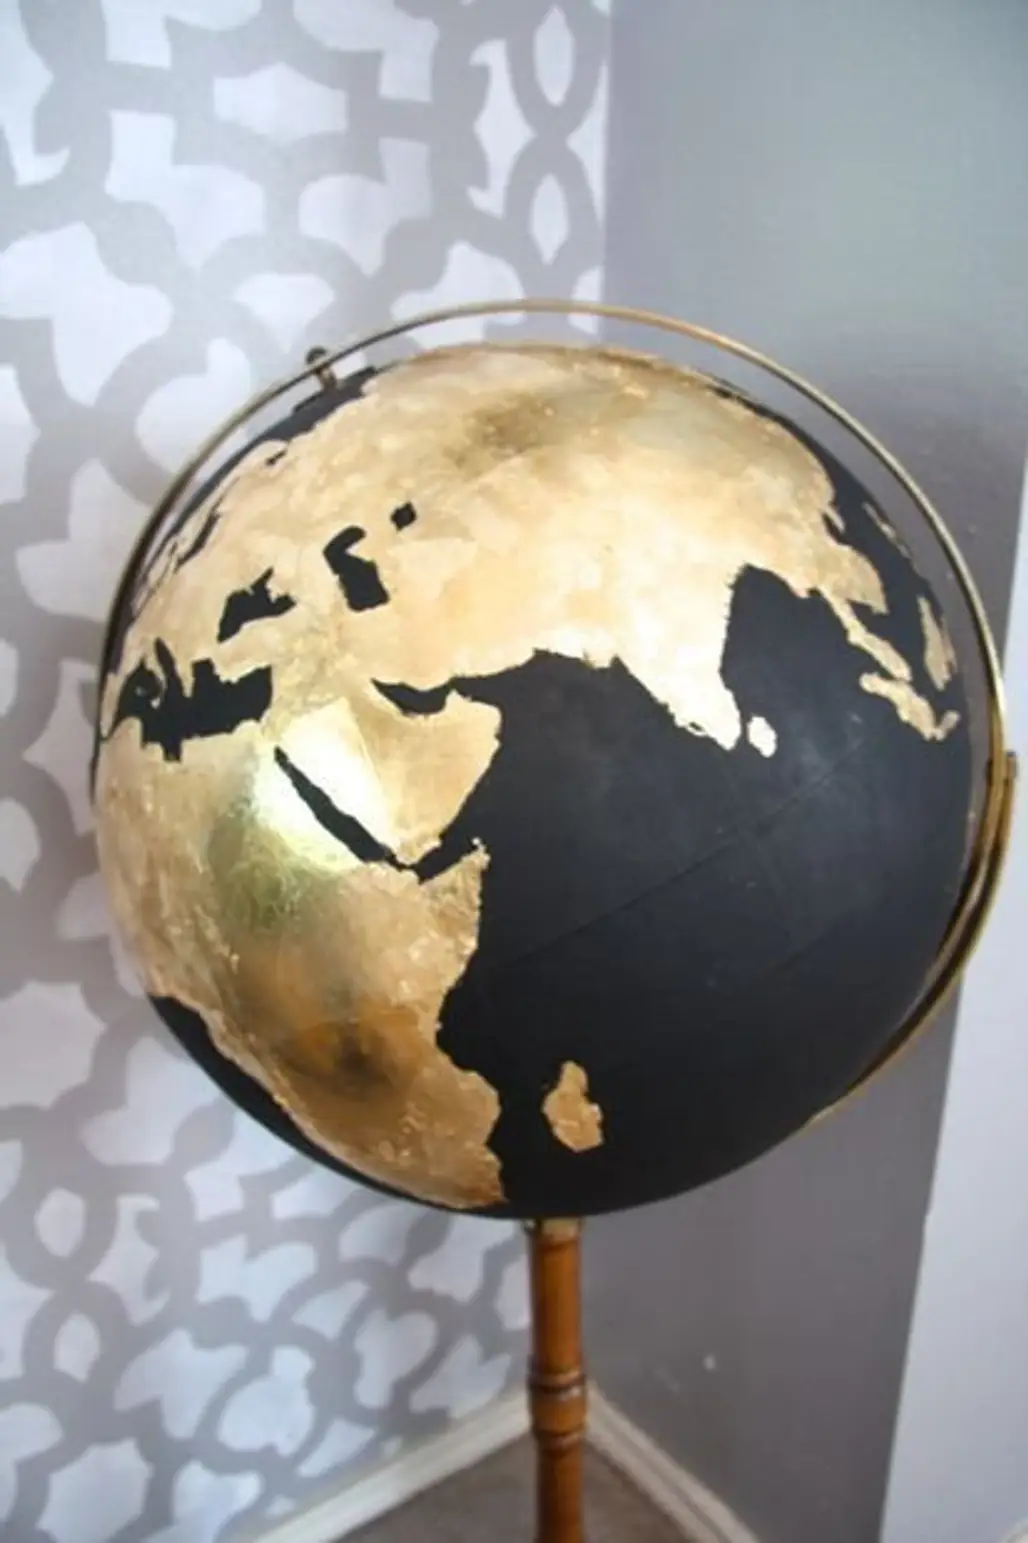 How Cool is This DIY Black & Gold Globe?